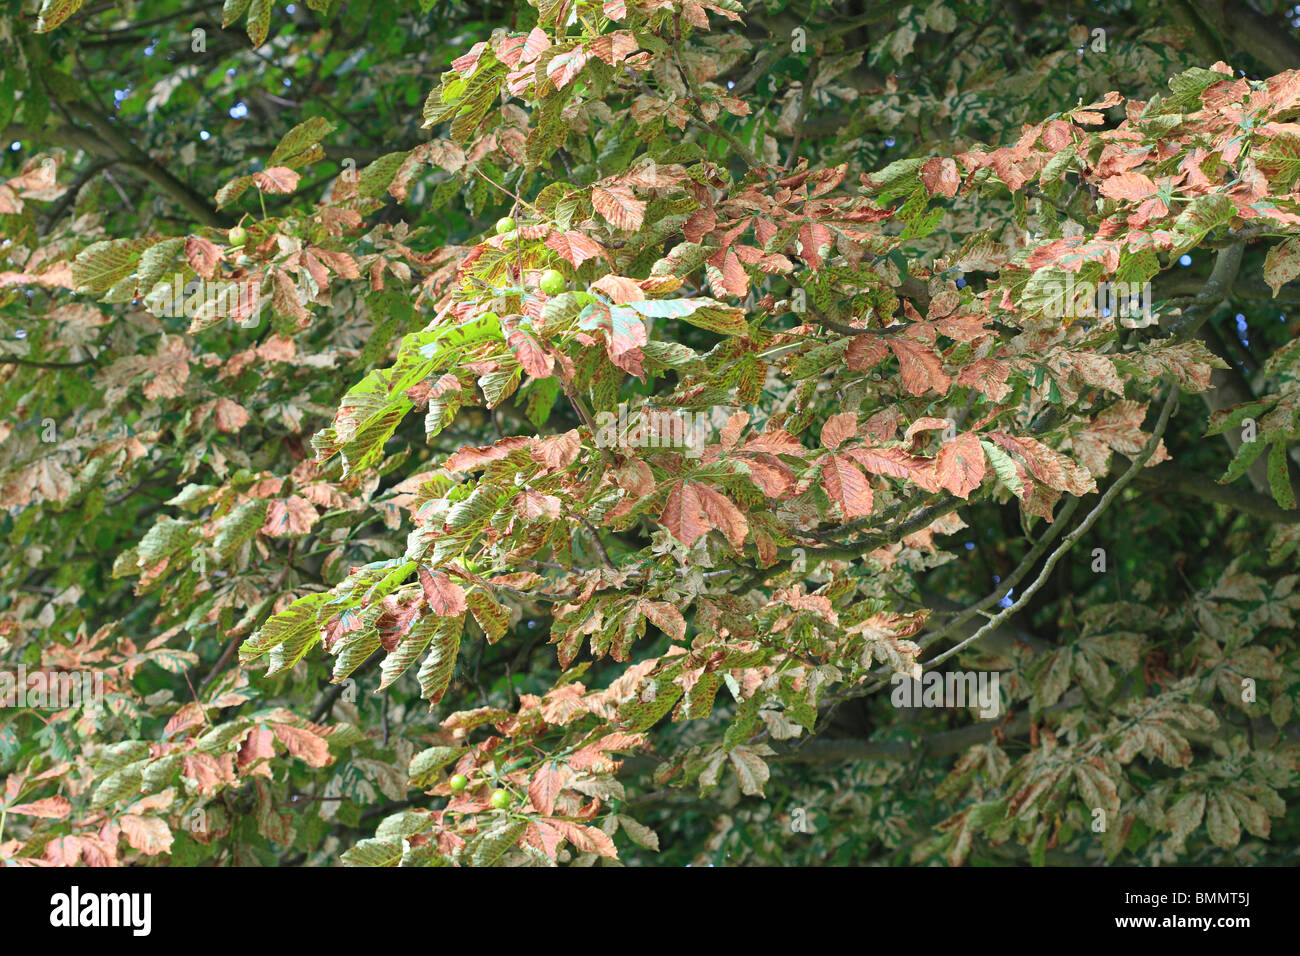 HORSE CHESTNUT LEAF MINER (Cameraria ohridella) SHOWING EXTENSIVE DAMAGE TO TREE IN MID SUMMER Stock Photo